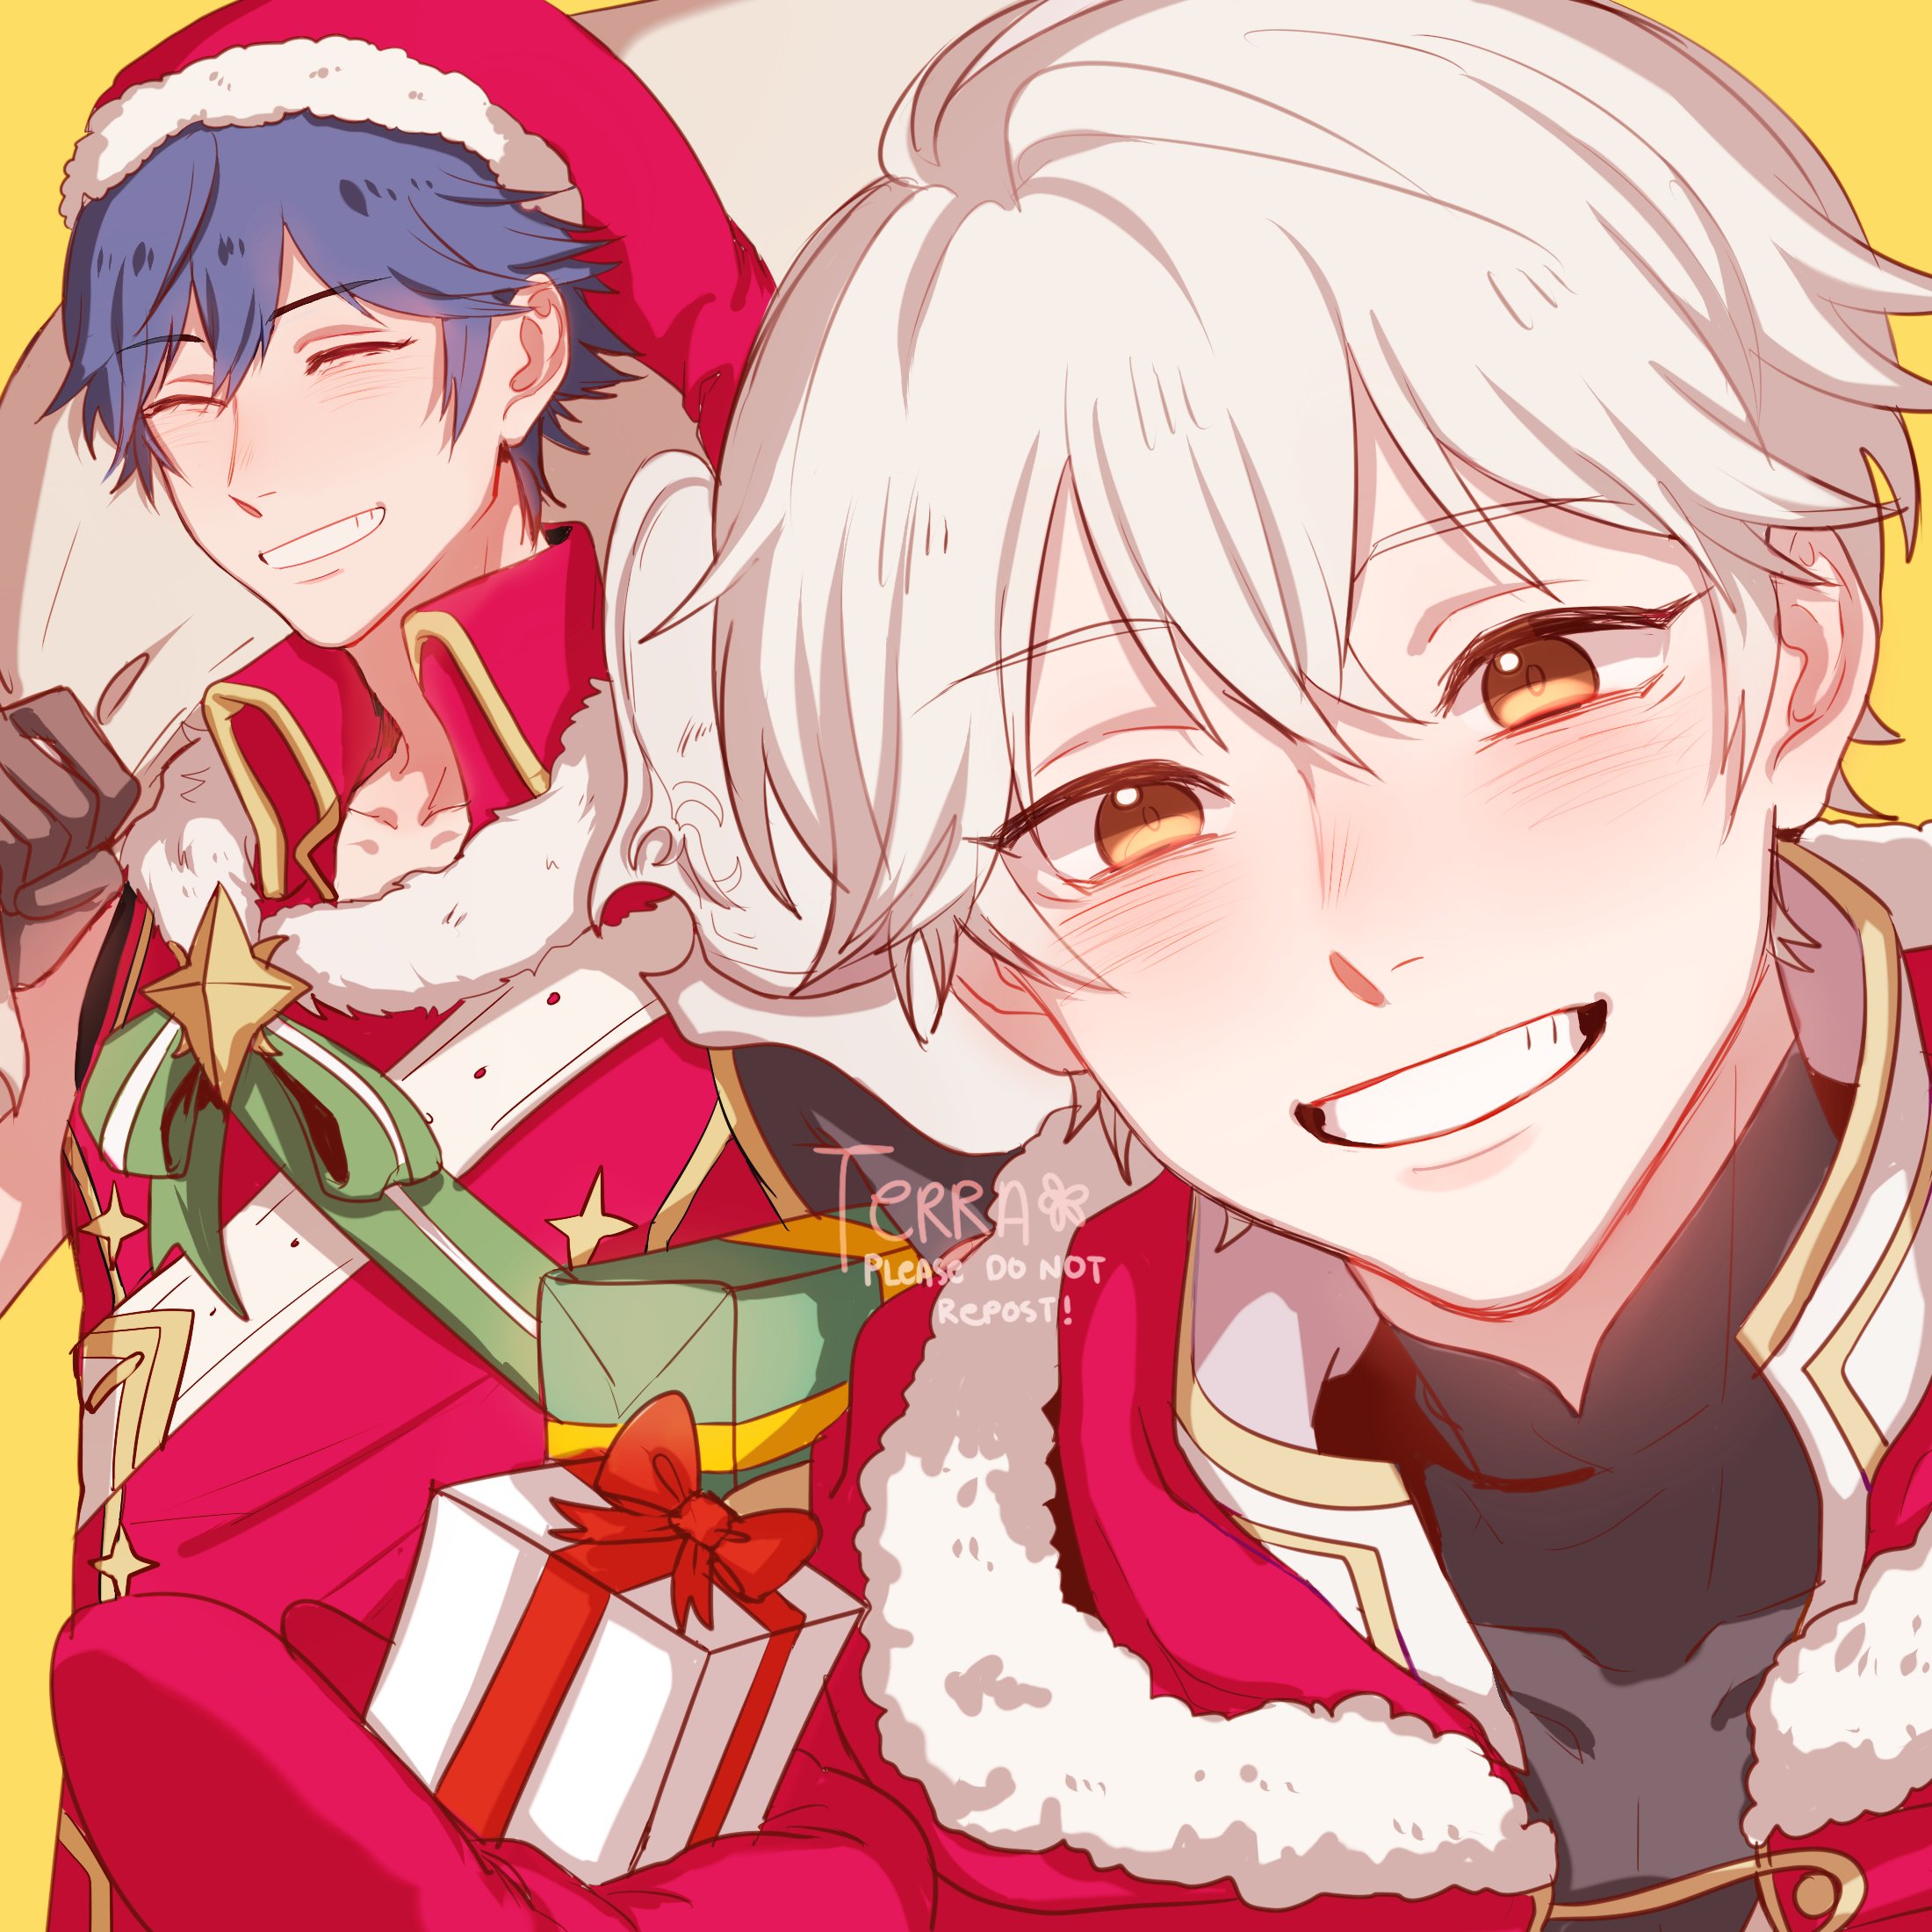 robin, robin, chrom, robin, and chrom (fire emblem and 2 more) drawn by ...